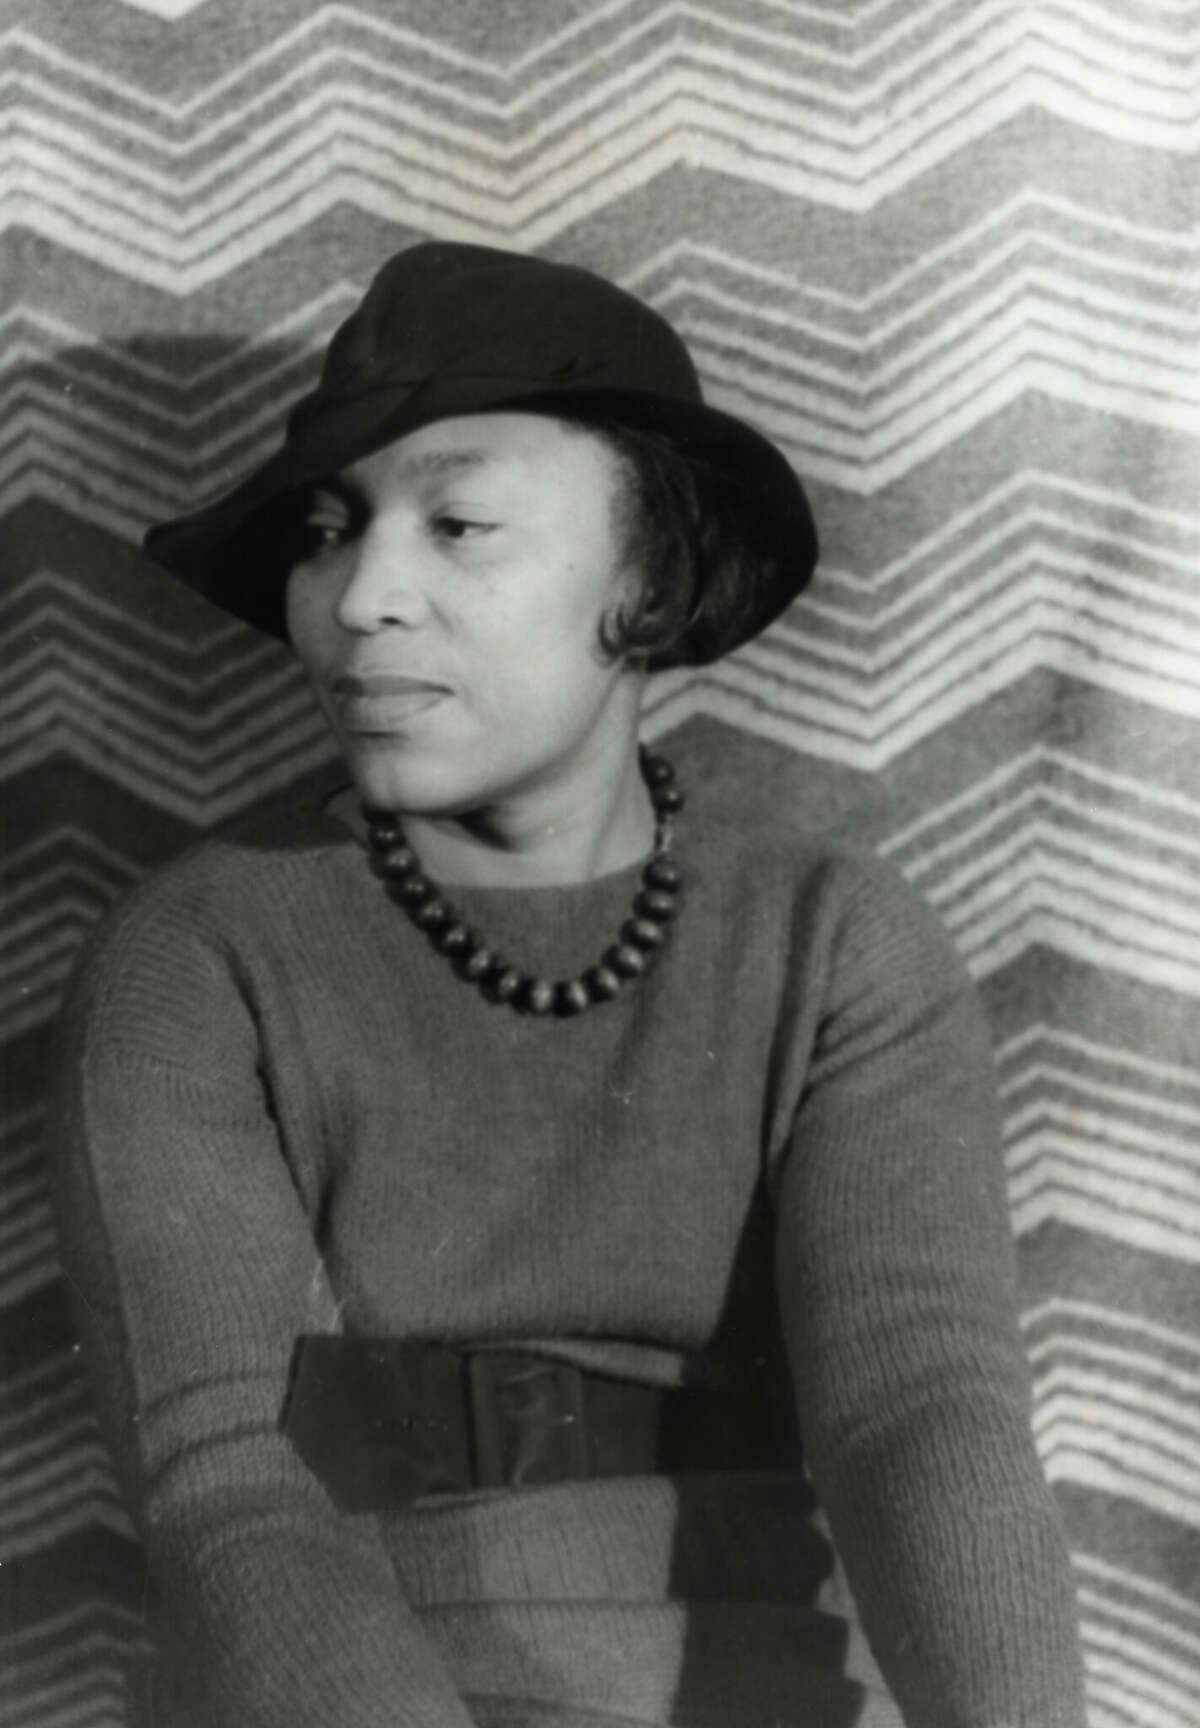 Zora Neale Hurston was friends withCarl Van Vechten, famed photographer during the Harlem Renaissance, who took this portrait on April 4, 1935.